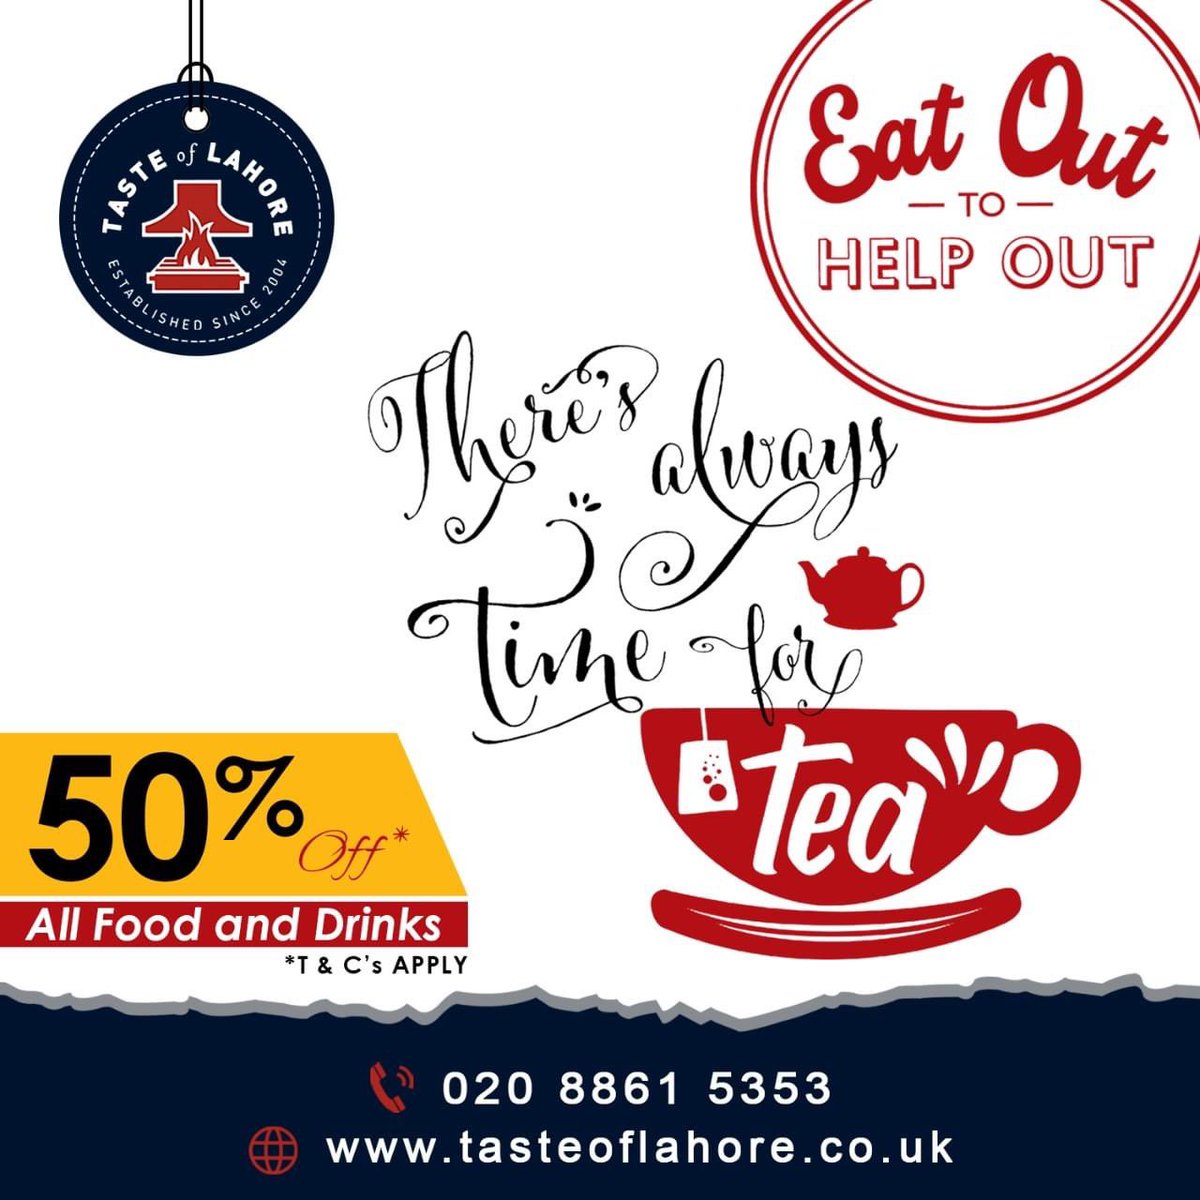 Where there’s TEA☕️ , there is Love & Hope♥️

Celebrate #AfternoonTeaWeek with us at Taste of Lahore #Harrow along with the #Eatouttohelpout discount! 

#Afternoonteaweek
#eatoutlondon #eatouttohelpout #augustoffer #dinein #dineinoffer #halfprices #harrow #TasteofLahore